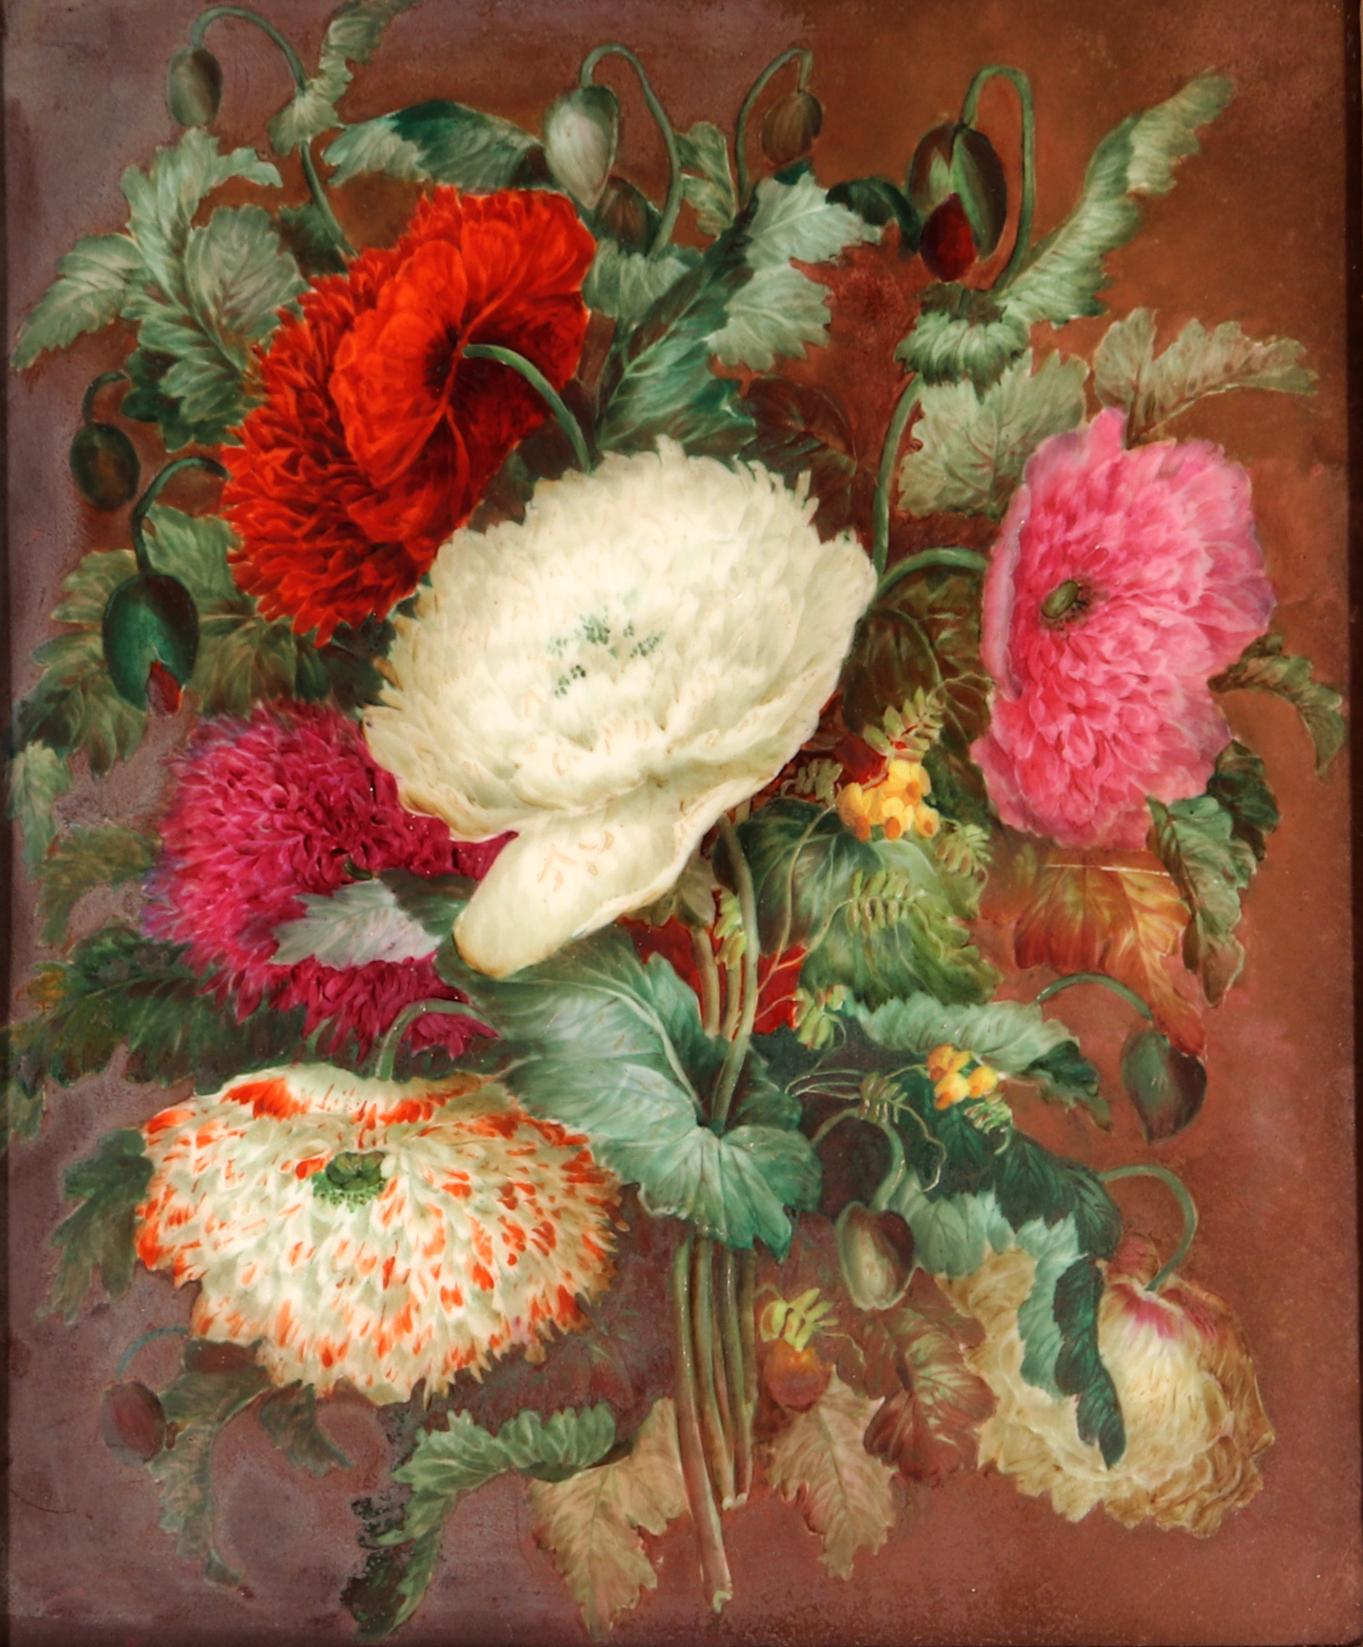 Beautiful English Porcelain Botanical Plaque,
Attributed to Derby,
Circa 1825

The upright rectangular porcelain plaque is painted with a finely painted grouping of flowers gathered into a bouquet against a dark brown background.

Dimensions: